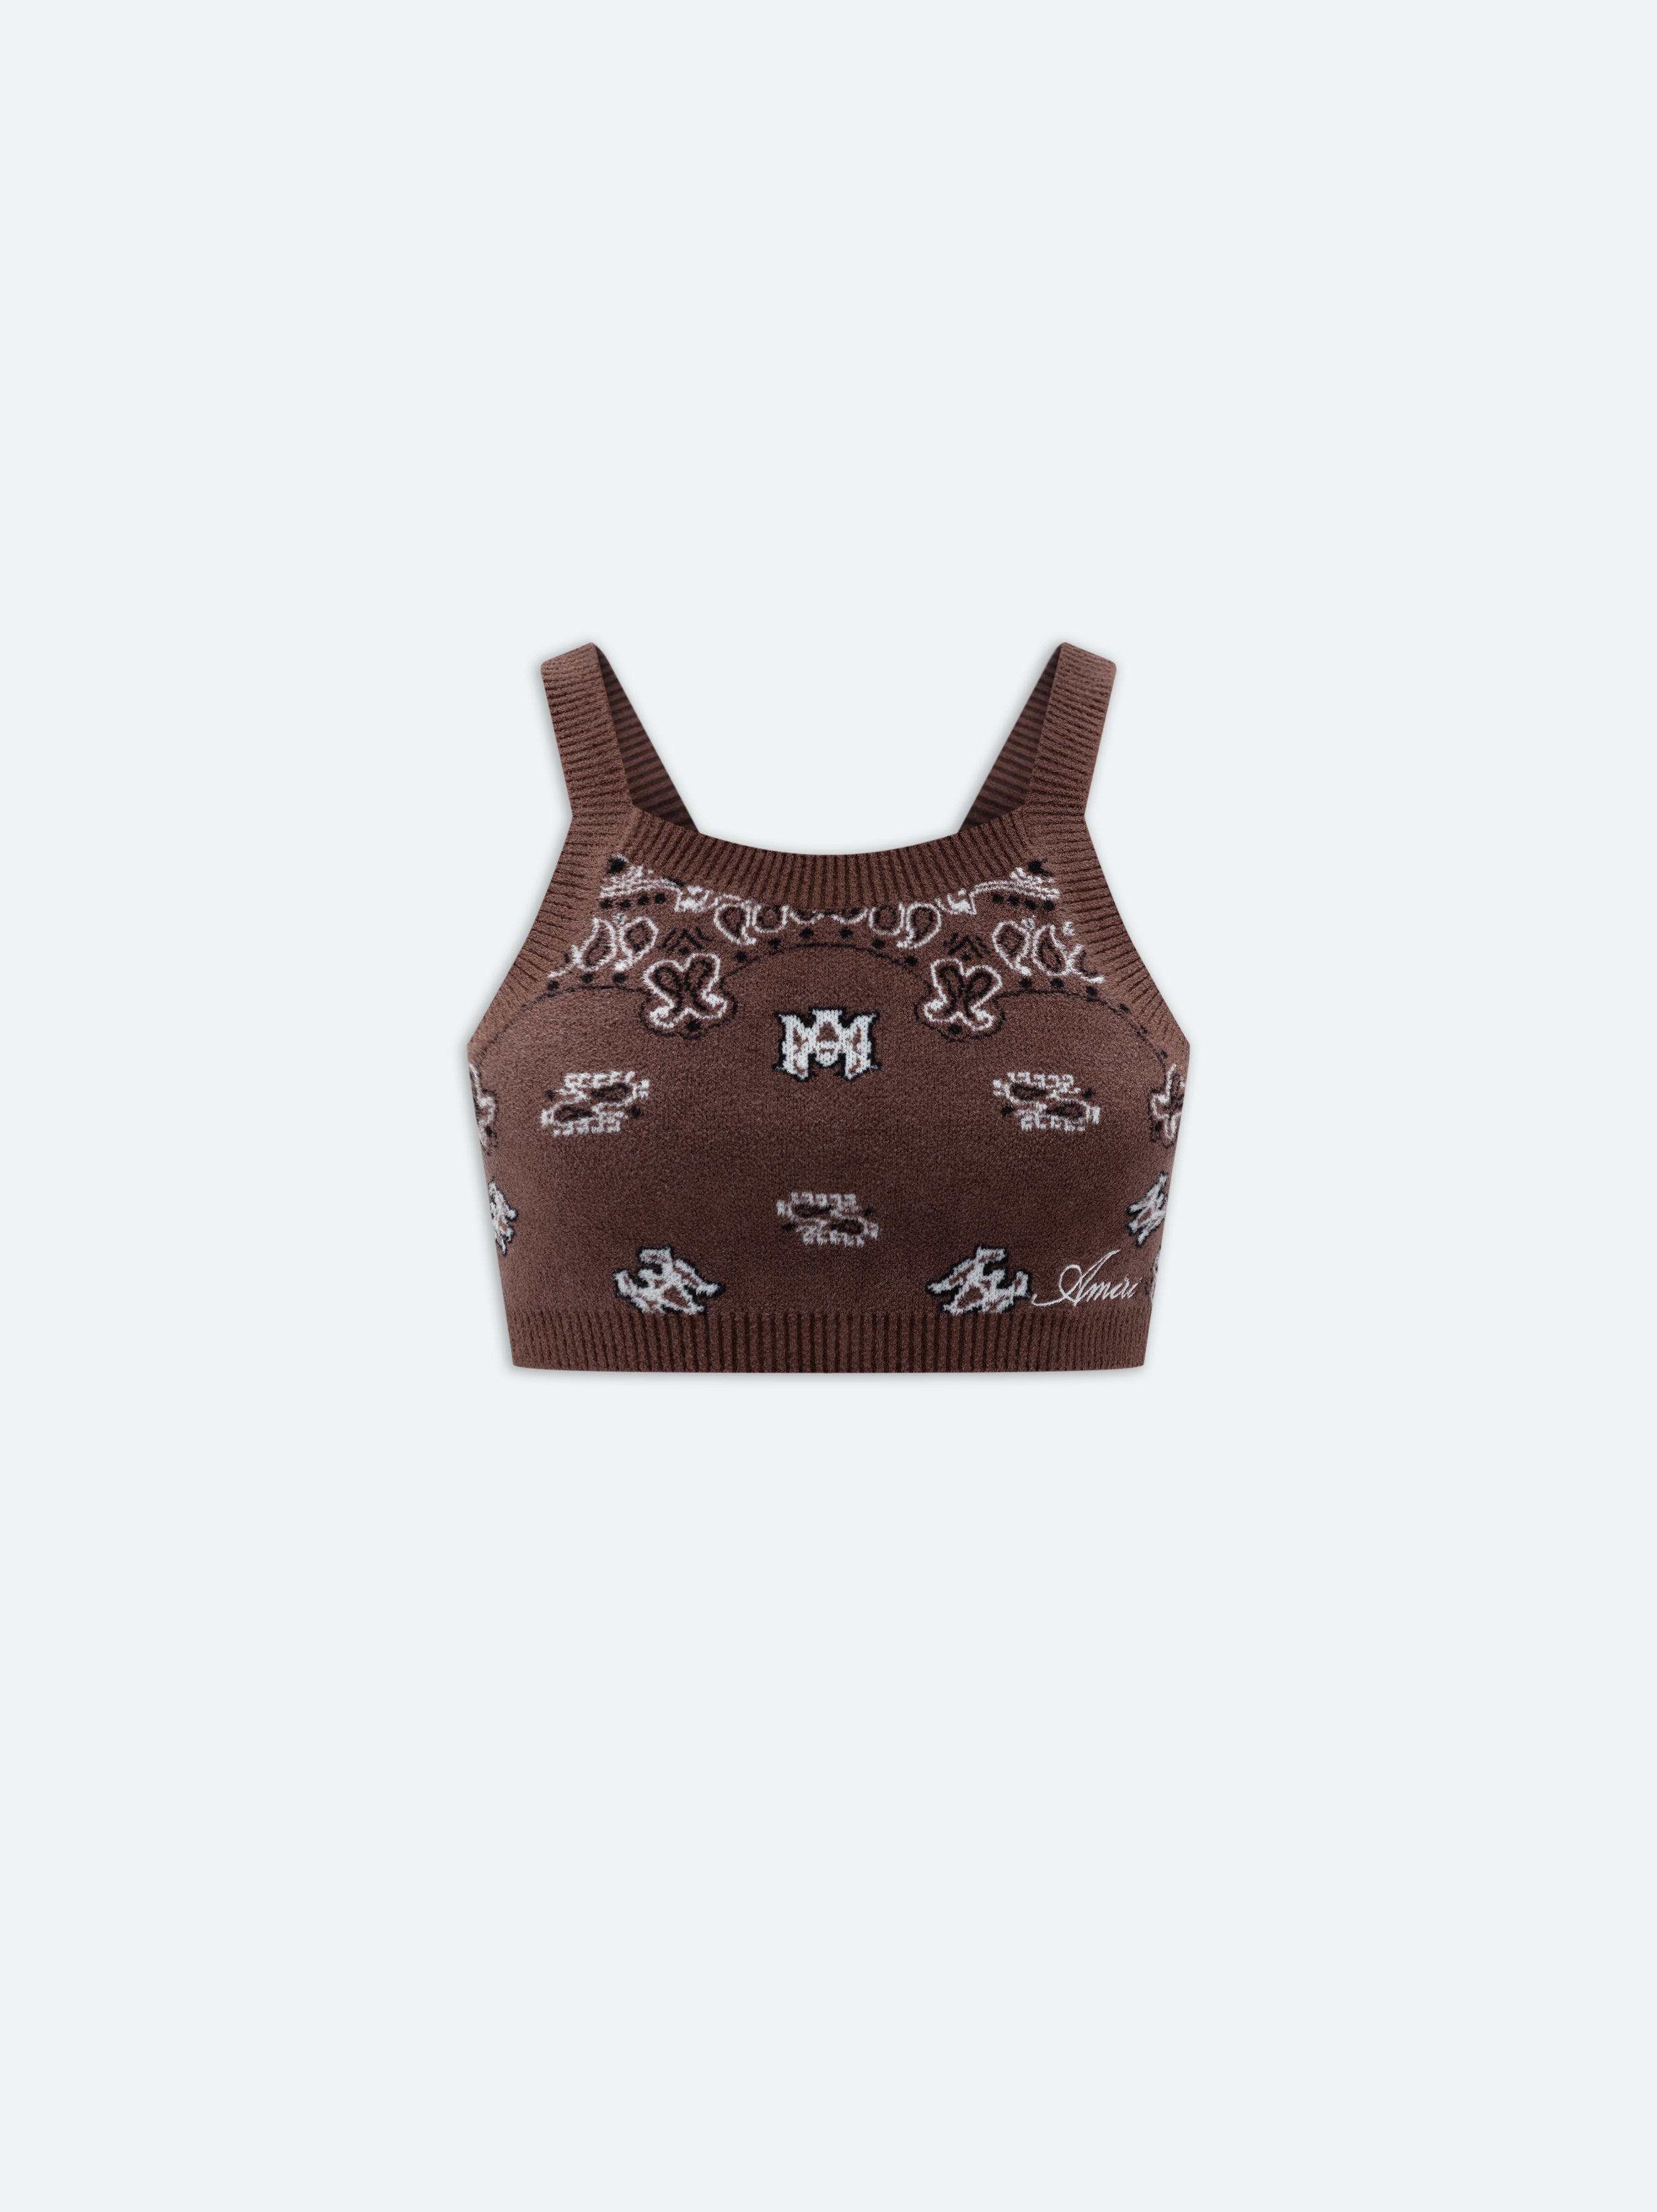 Product WOMEN - BANDANA CROPPED TANK - Brown featured image